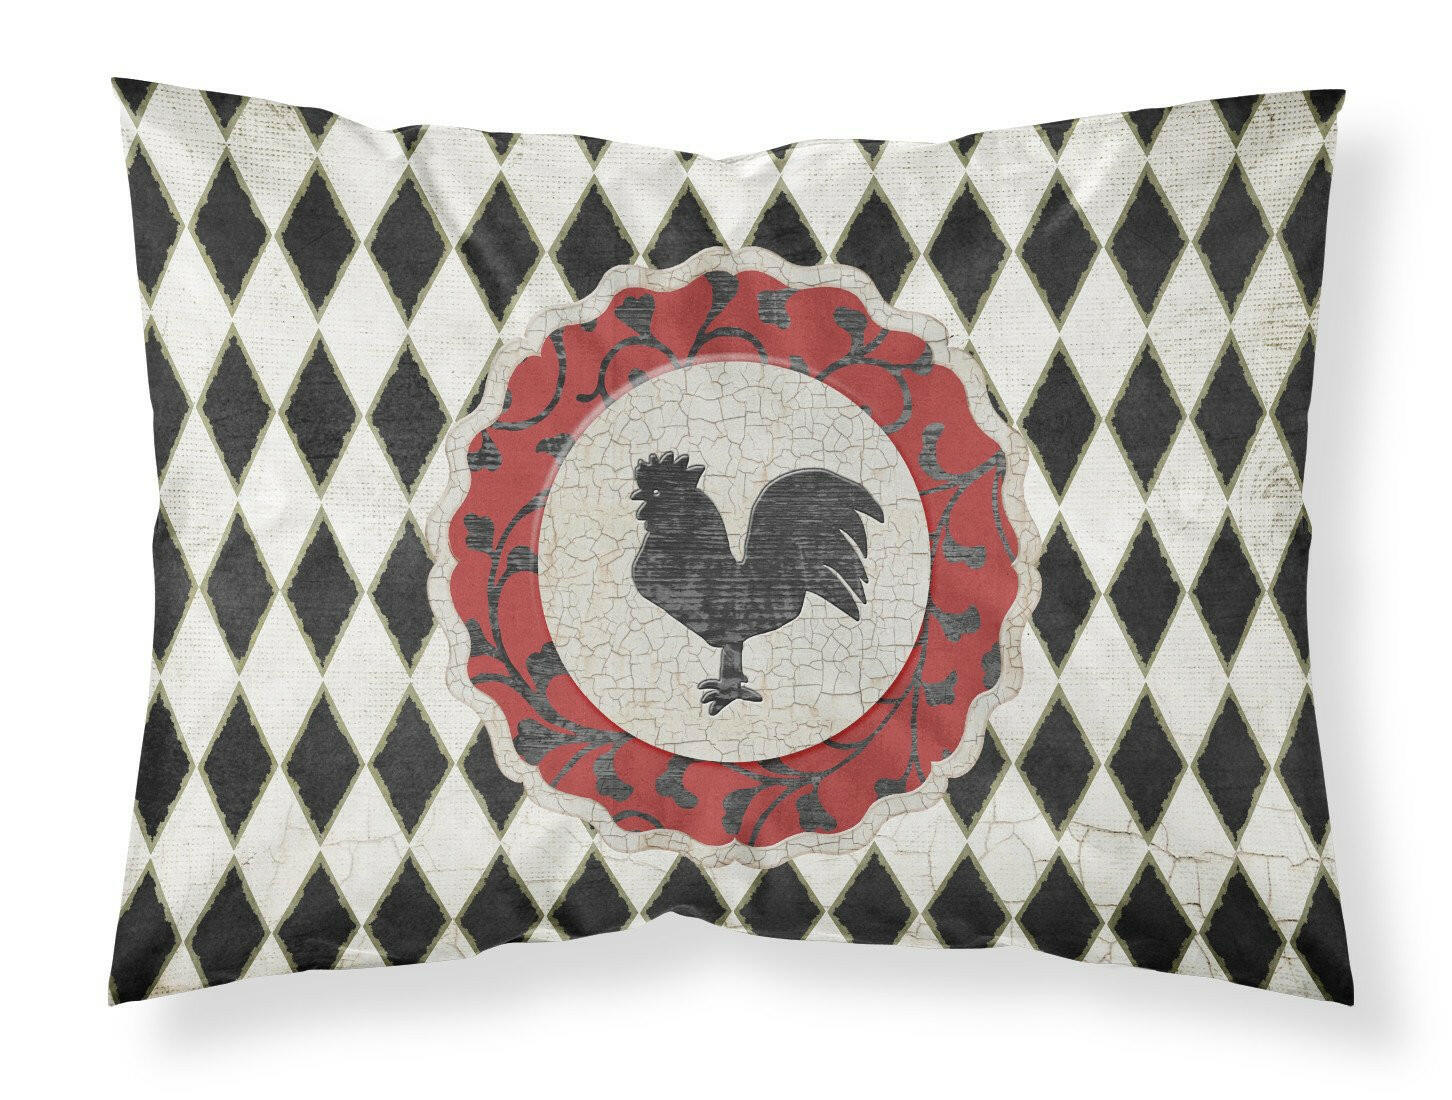 Rooster Harlequin Black and white Moisture wicking Fabric standard pillowcase SB3086PILLOWCASE by Caroline's Treasures